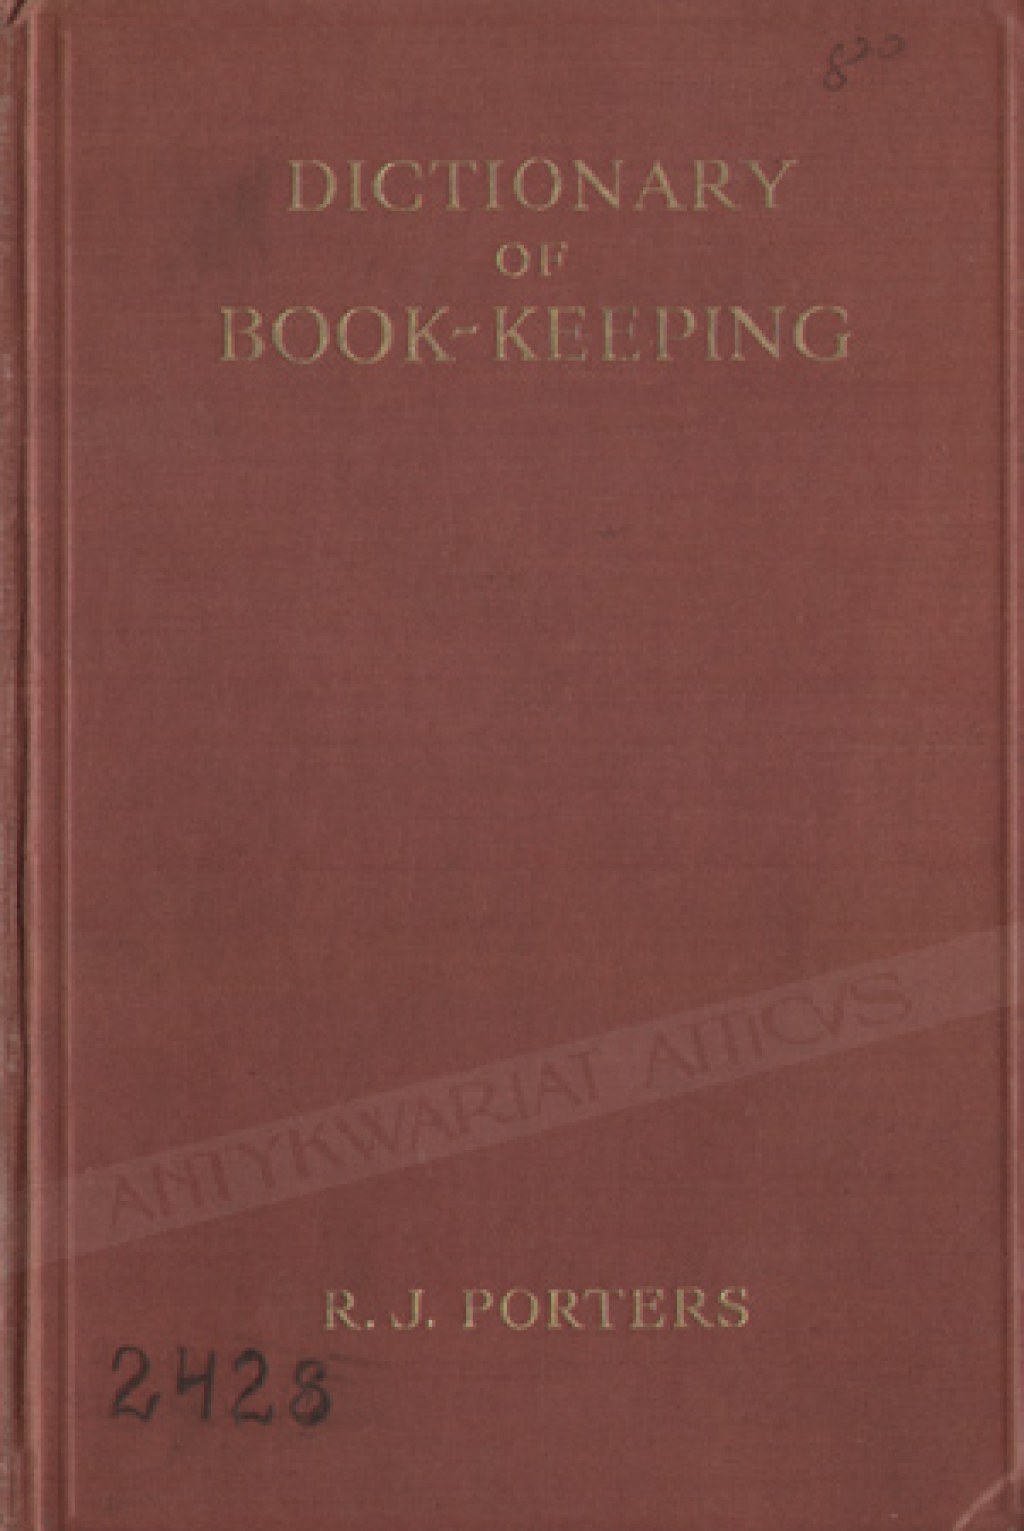 Dictionary of book-keeping. A book of reference on all matters concerning book-keeping and accountancy for students, teachers and practitioners